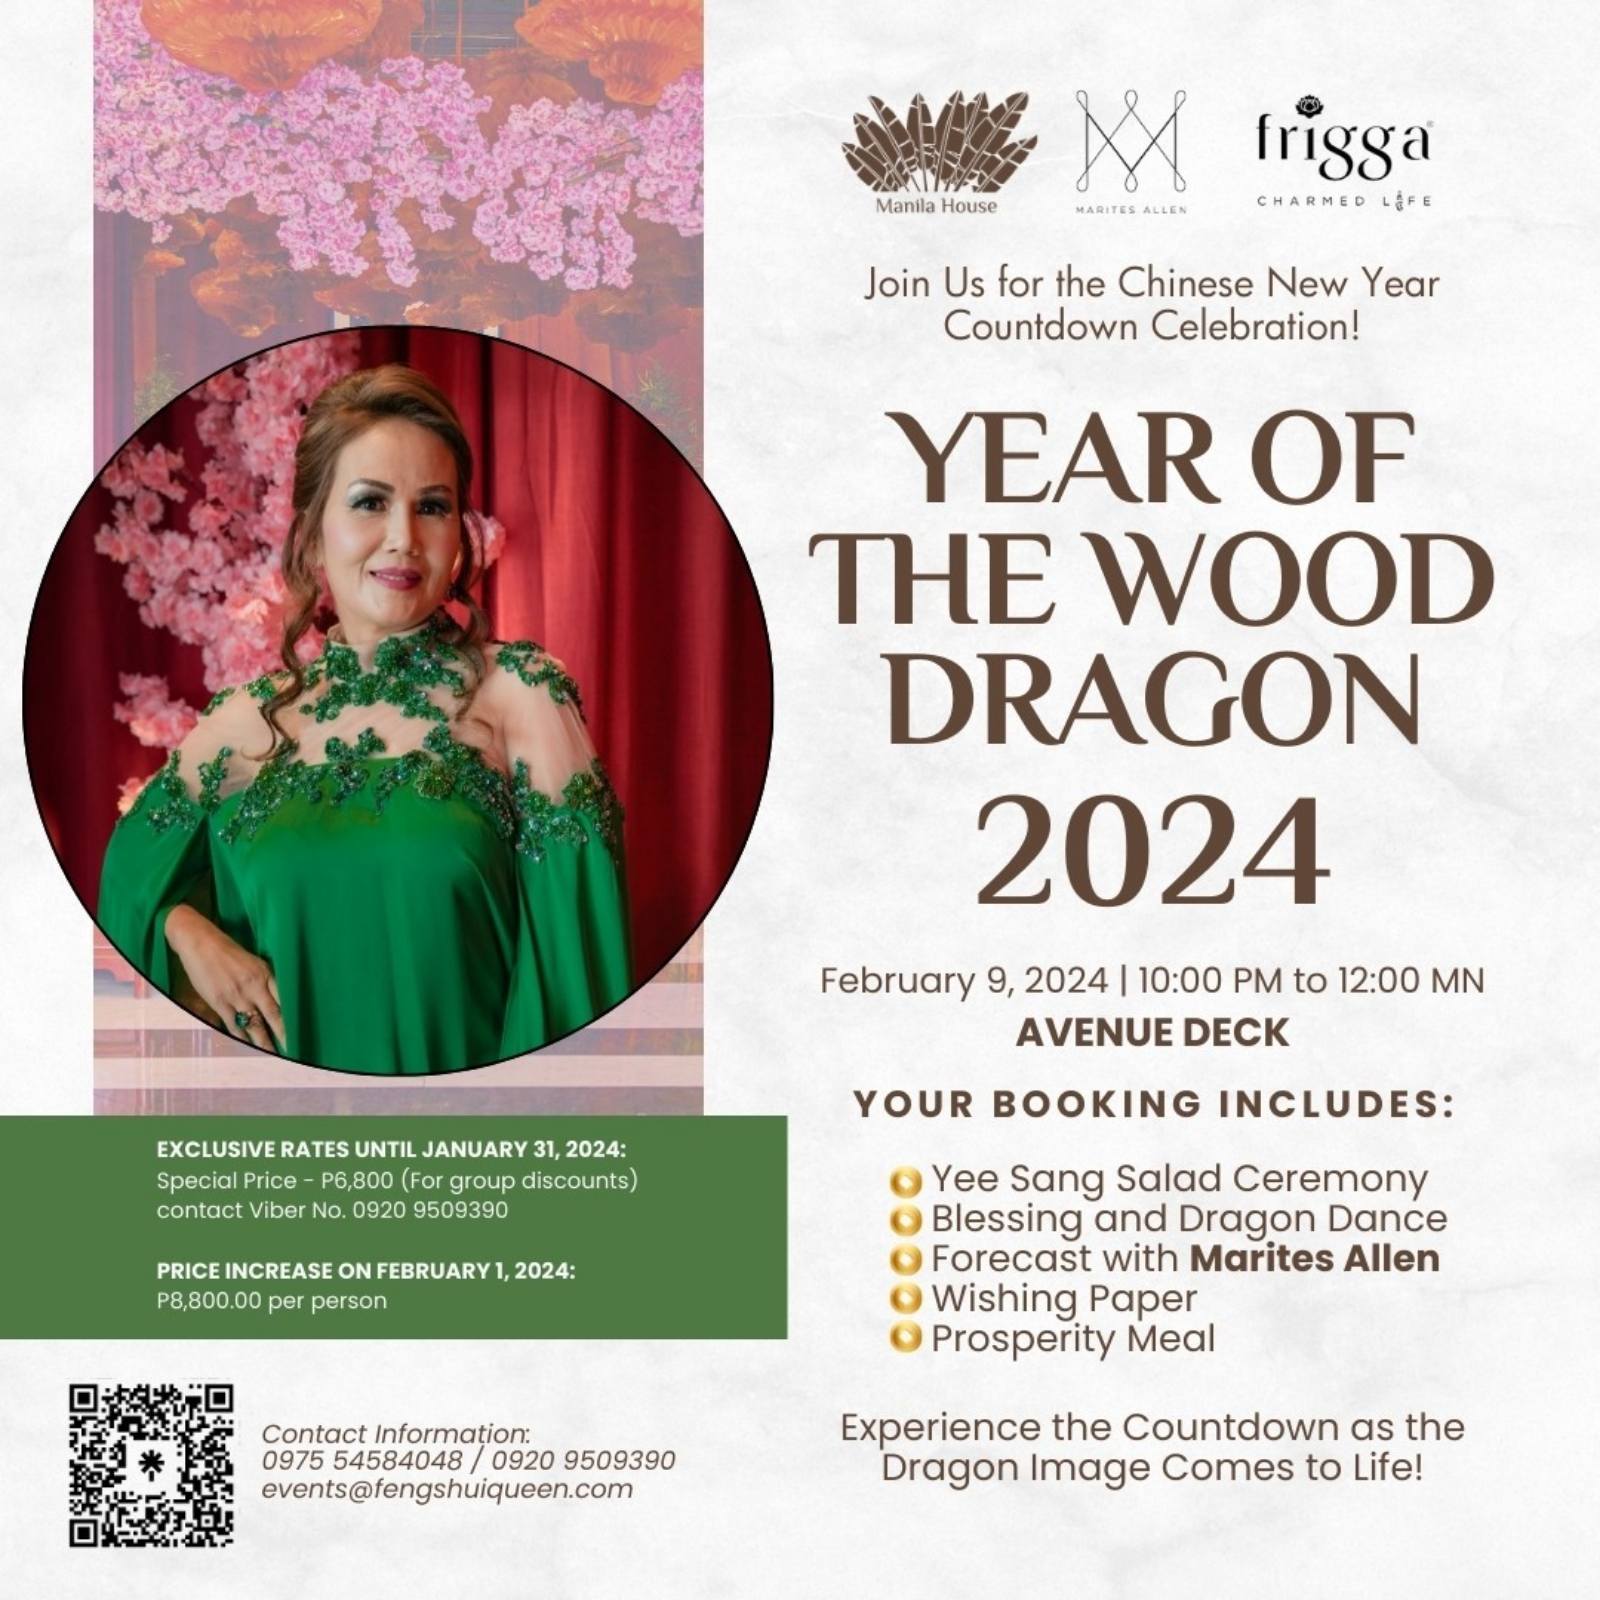 Celebrate the countdown to 2024, the Year of the Wood Dragon, with Marites Allen